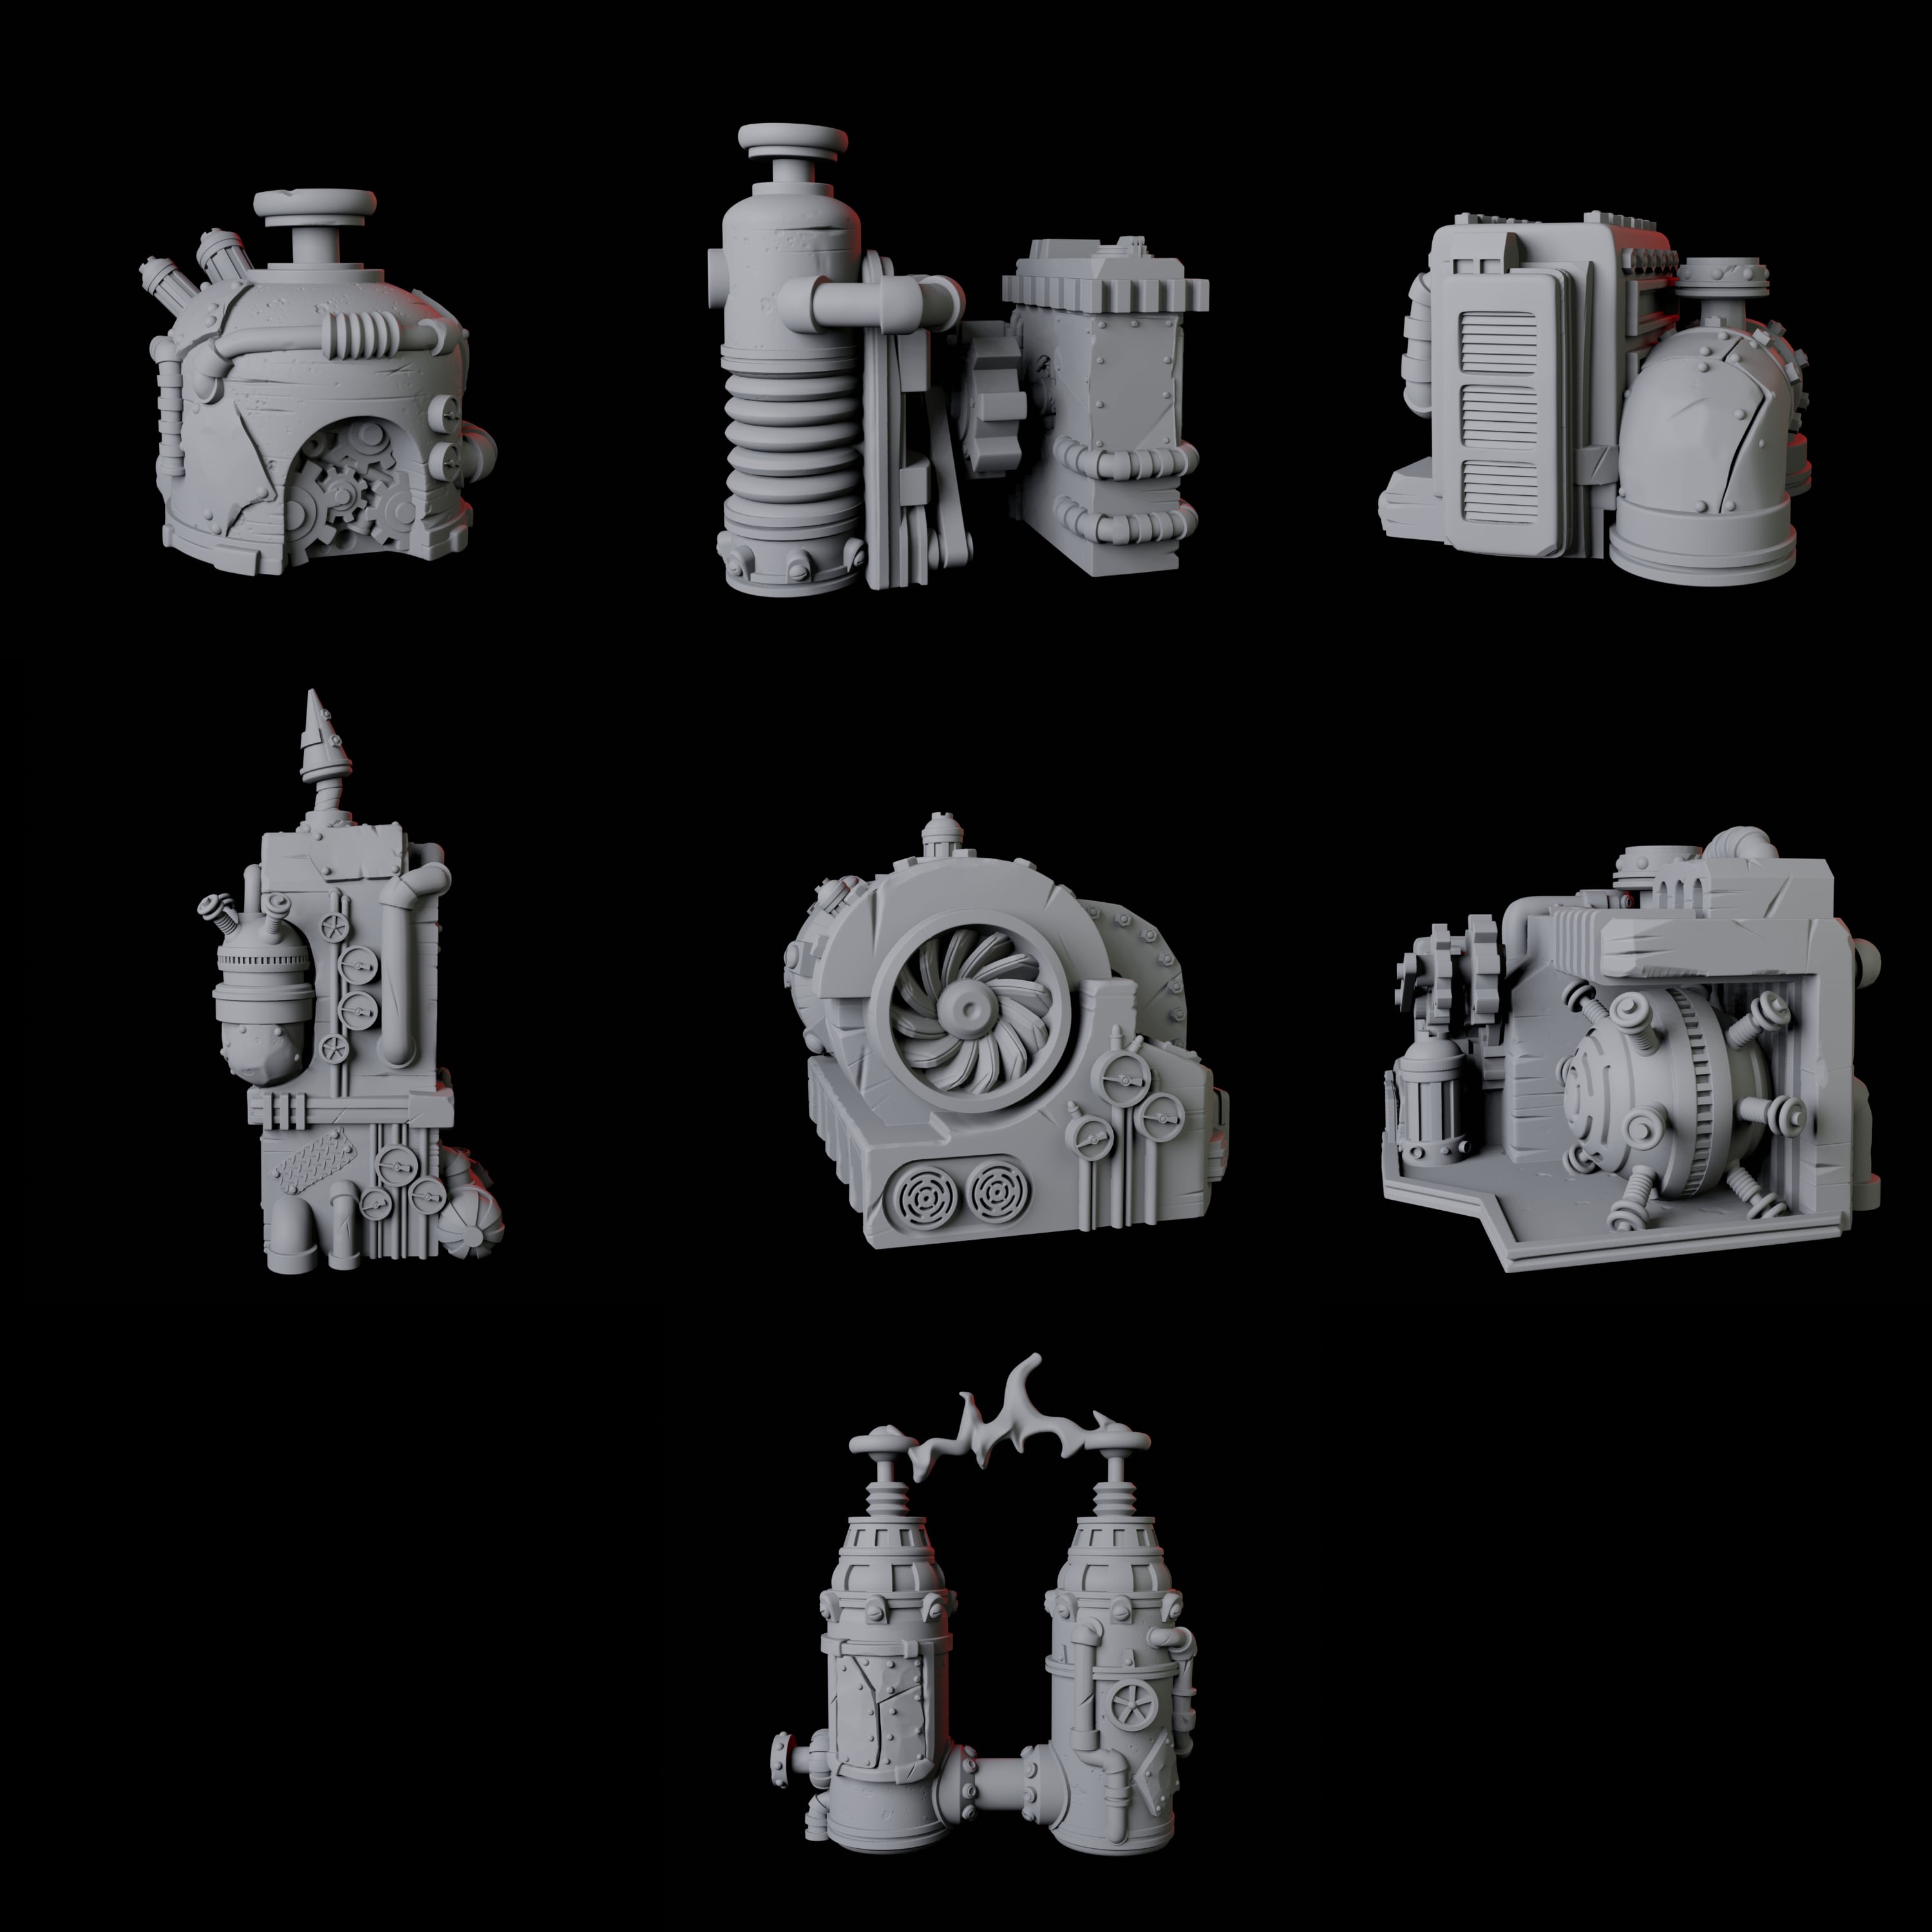 Laboratory Equipment and Machines Miniature for Dungeons and Dragons